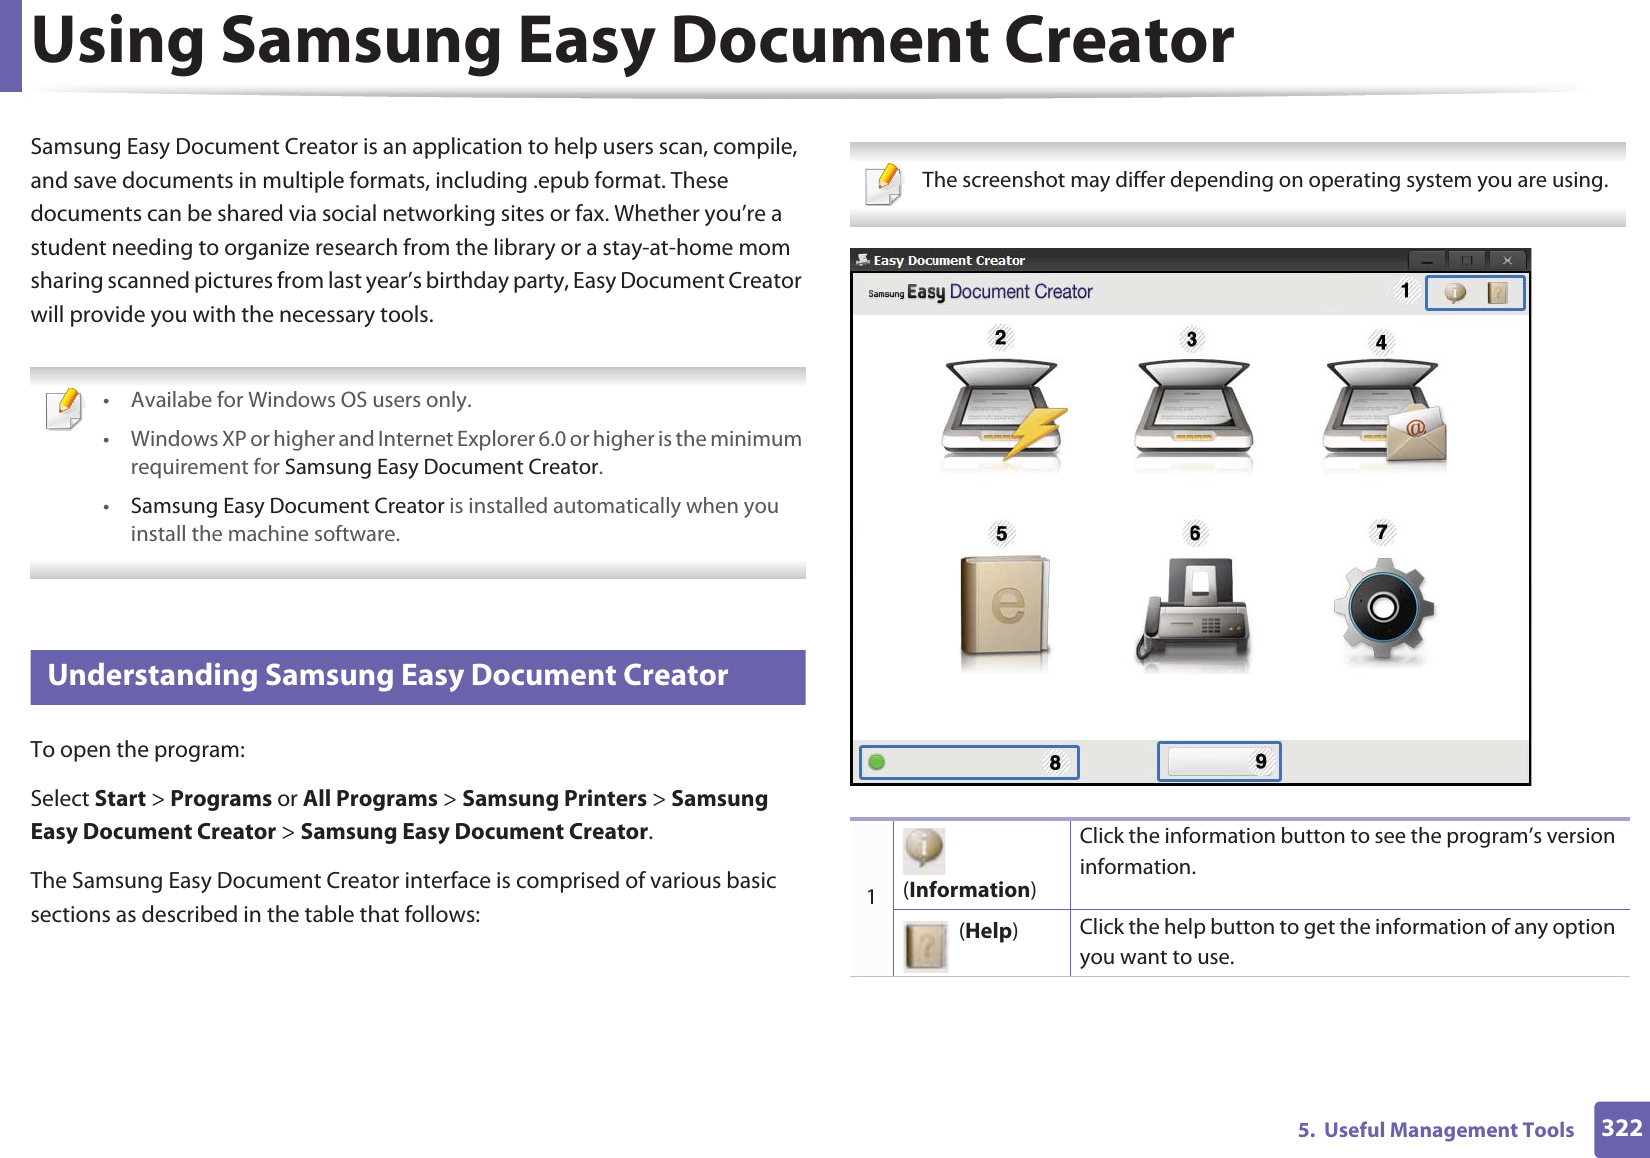 3225.  Useful Management ToolsUsing Samsung Easy Document CreatorSamsung Easy Document Creator is an application to help users scan, compile, and save documents in multiple formats, including .epub format. These documents can be shared via social networking sites or fax. Whether you’re a student needing to organize research from the library or a stay-at-home mom sharing scanned pictures from last year’s birthday party, Easy Document Creator will provide you with the necessary tools. • Availabe for Windows OS users only.• Windows XP or higher and Internet Explorer 6.0 or higher is the minimum requirement for Samsung Easy Document Creator.•Samsung Easy Document Creator is installed automatically when you install the machine software.  5 Understanding Samsung Easy Document CreatorTo open the program: Select Start &gt; Programs or All Programs &gt; Samsung Printers &gt; Samsung Easy Document Creator &gt; Samsung Easy Document Creator.The Samsung Easy Document Creator interface is comprised of various basic sections as described in the table that follows: The screenshot may differ depending on operating system you are using. 1 (Information)Click the information button to see the program’s version information.  (Help)Click the help button to get the information of any option you want to use.